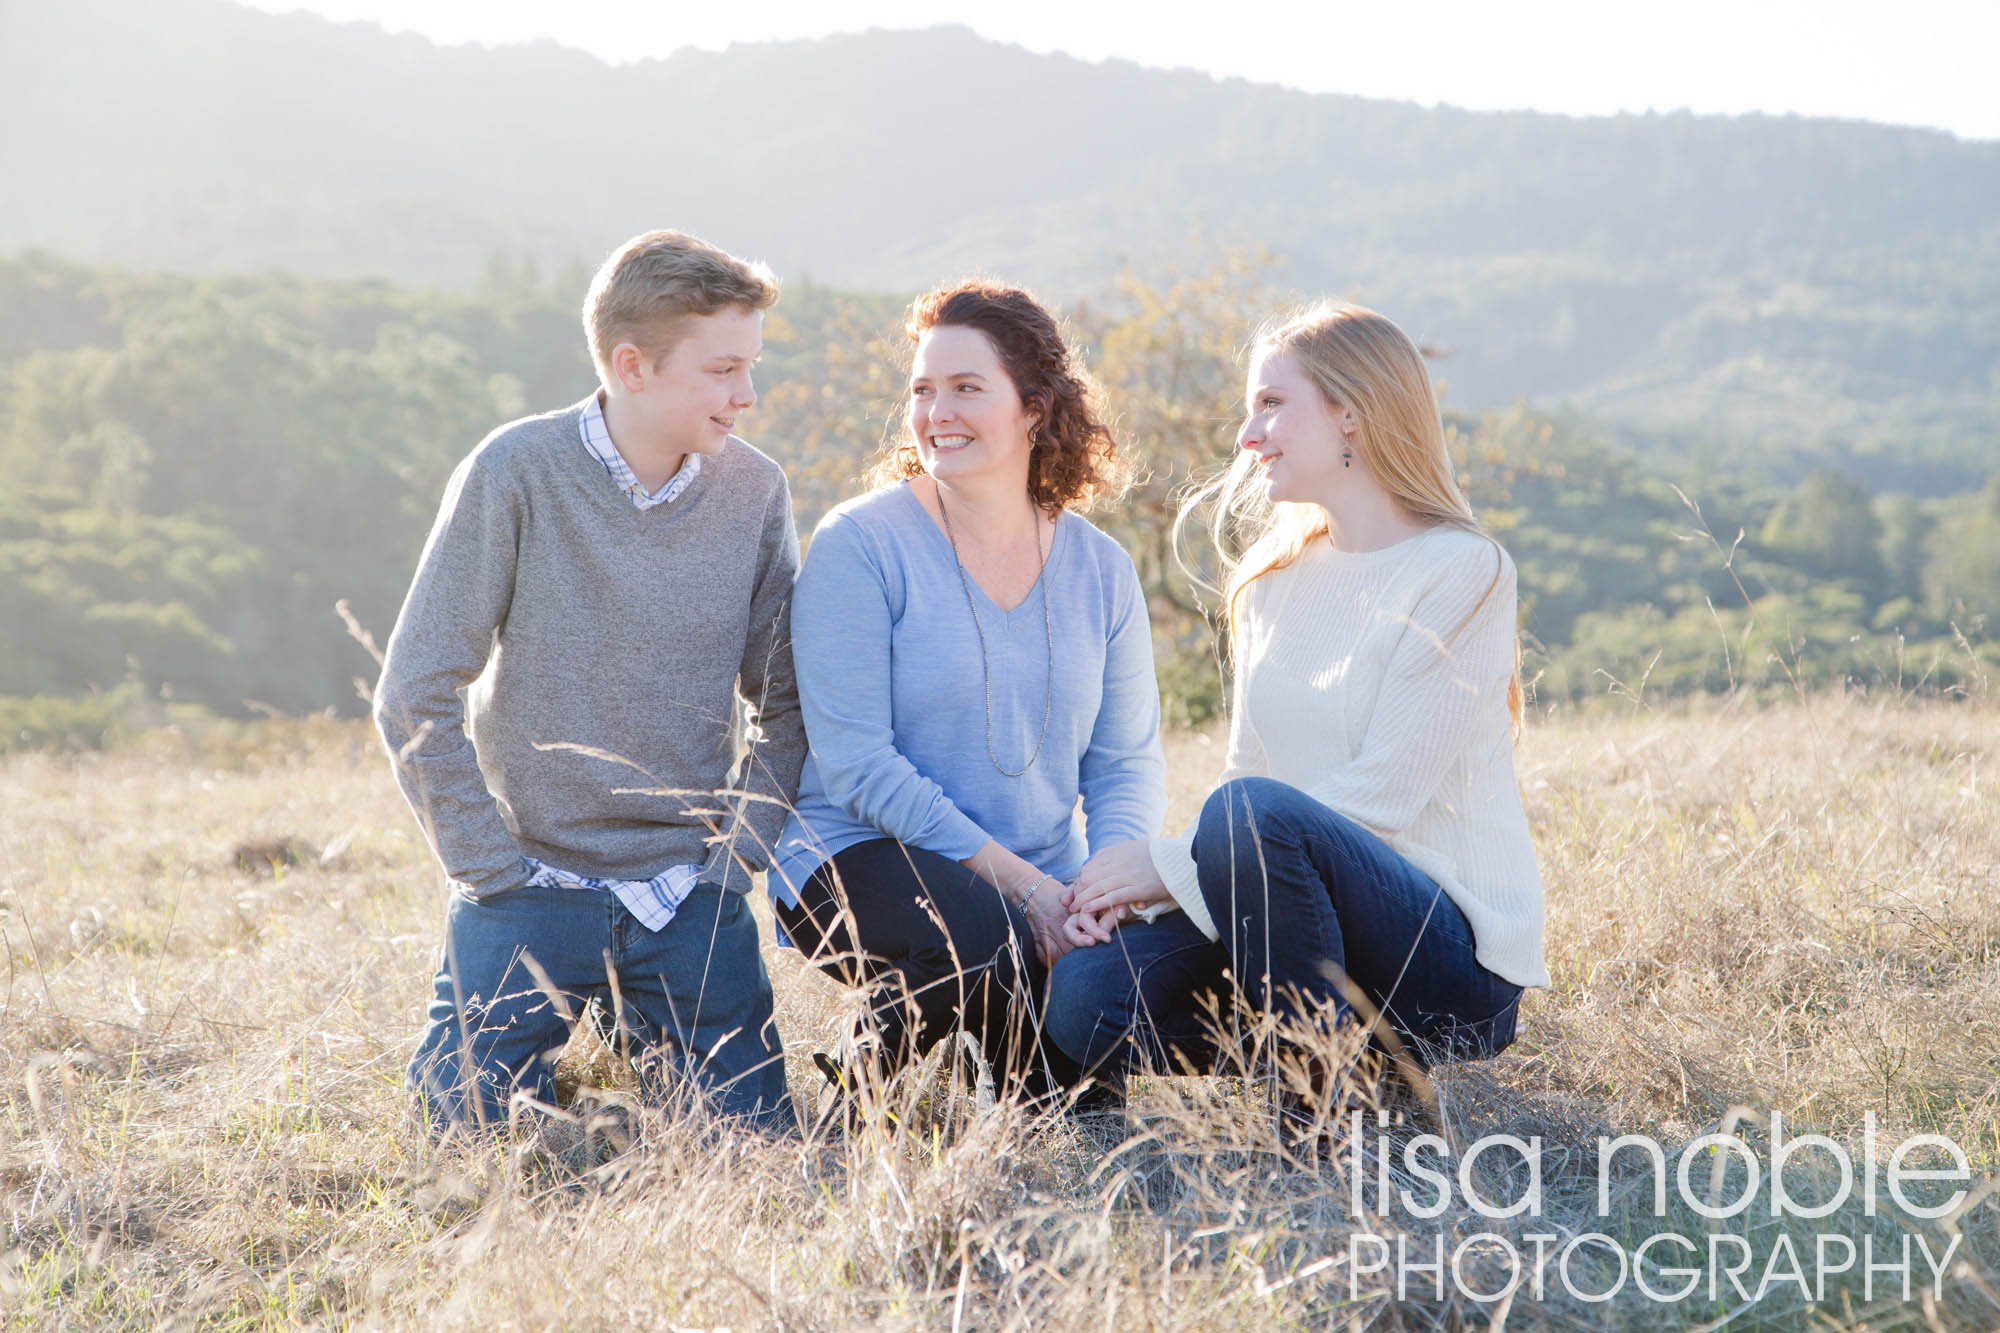 Family photographer has a photography session in the golden Bay Area hills